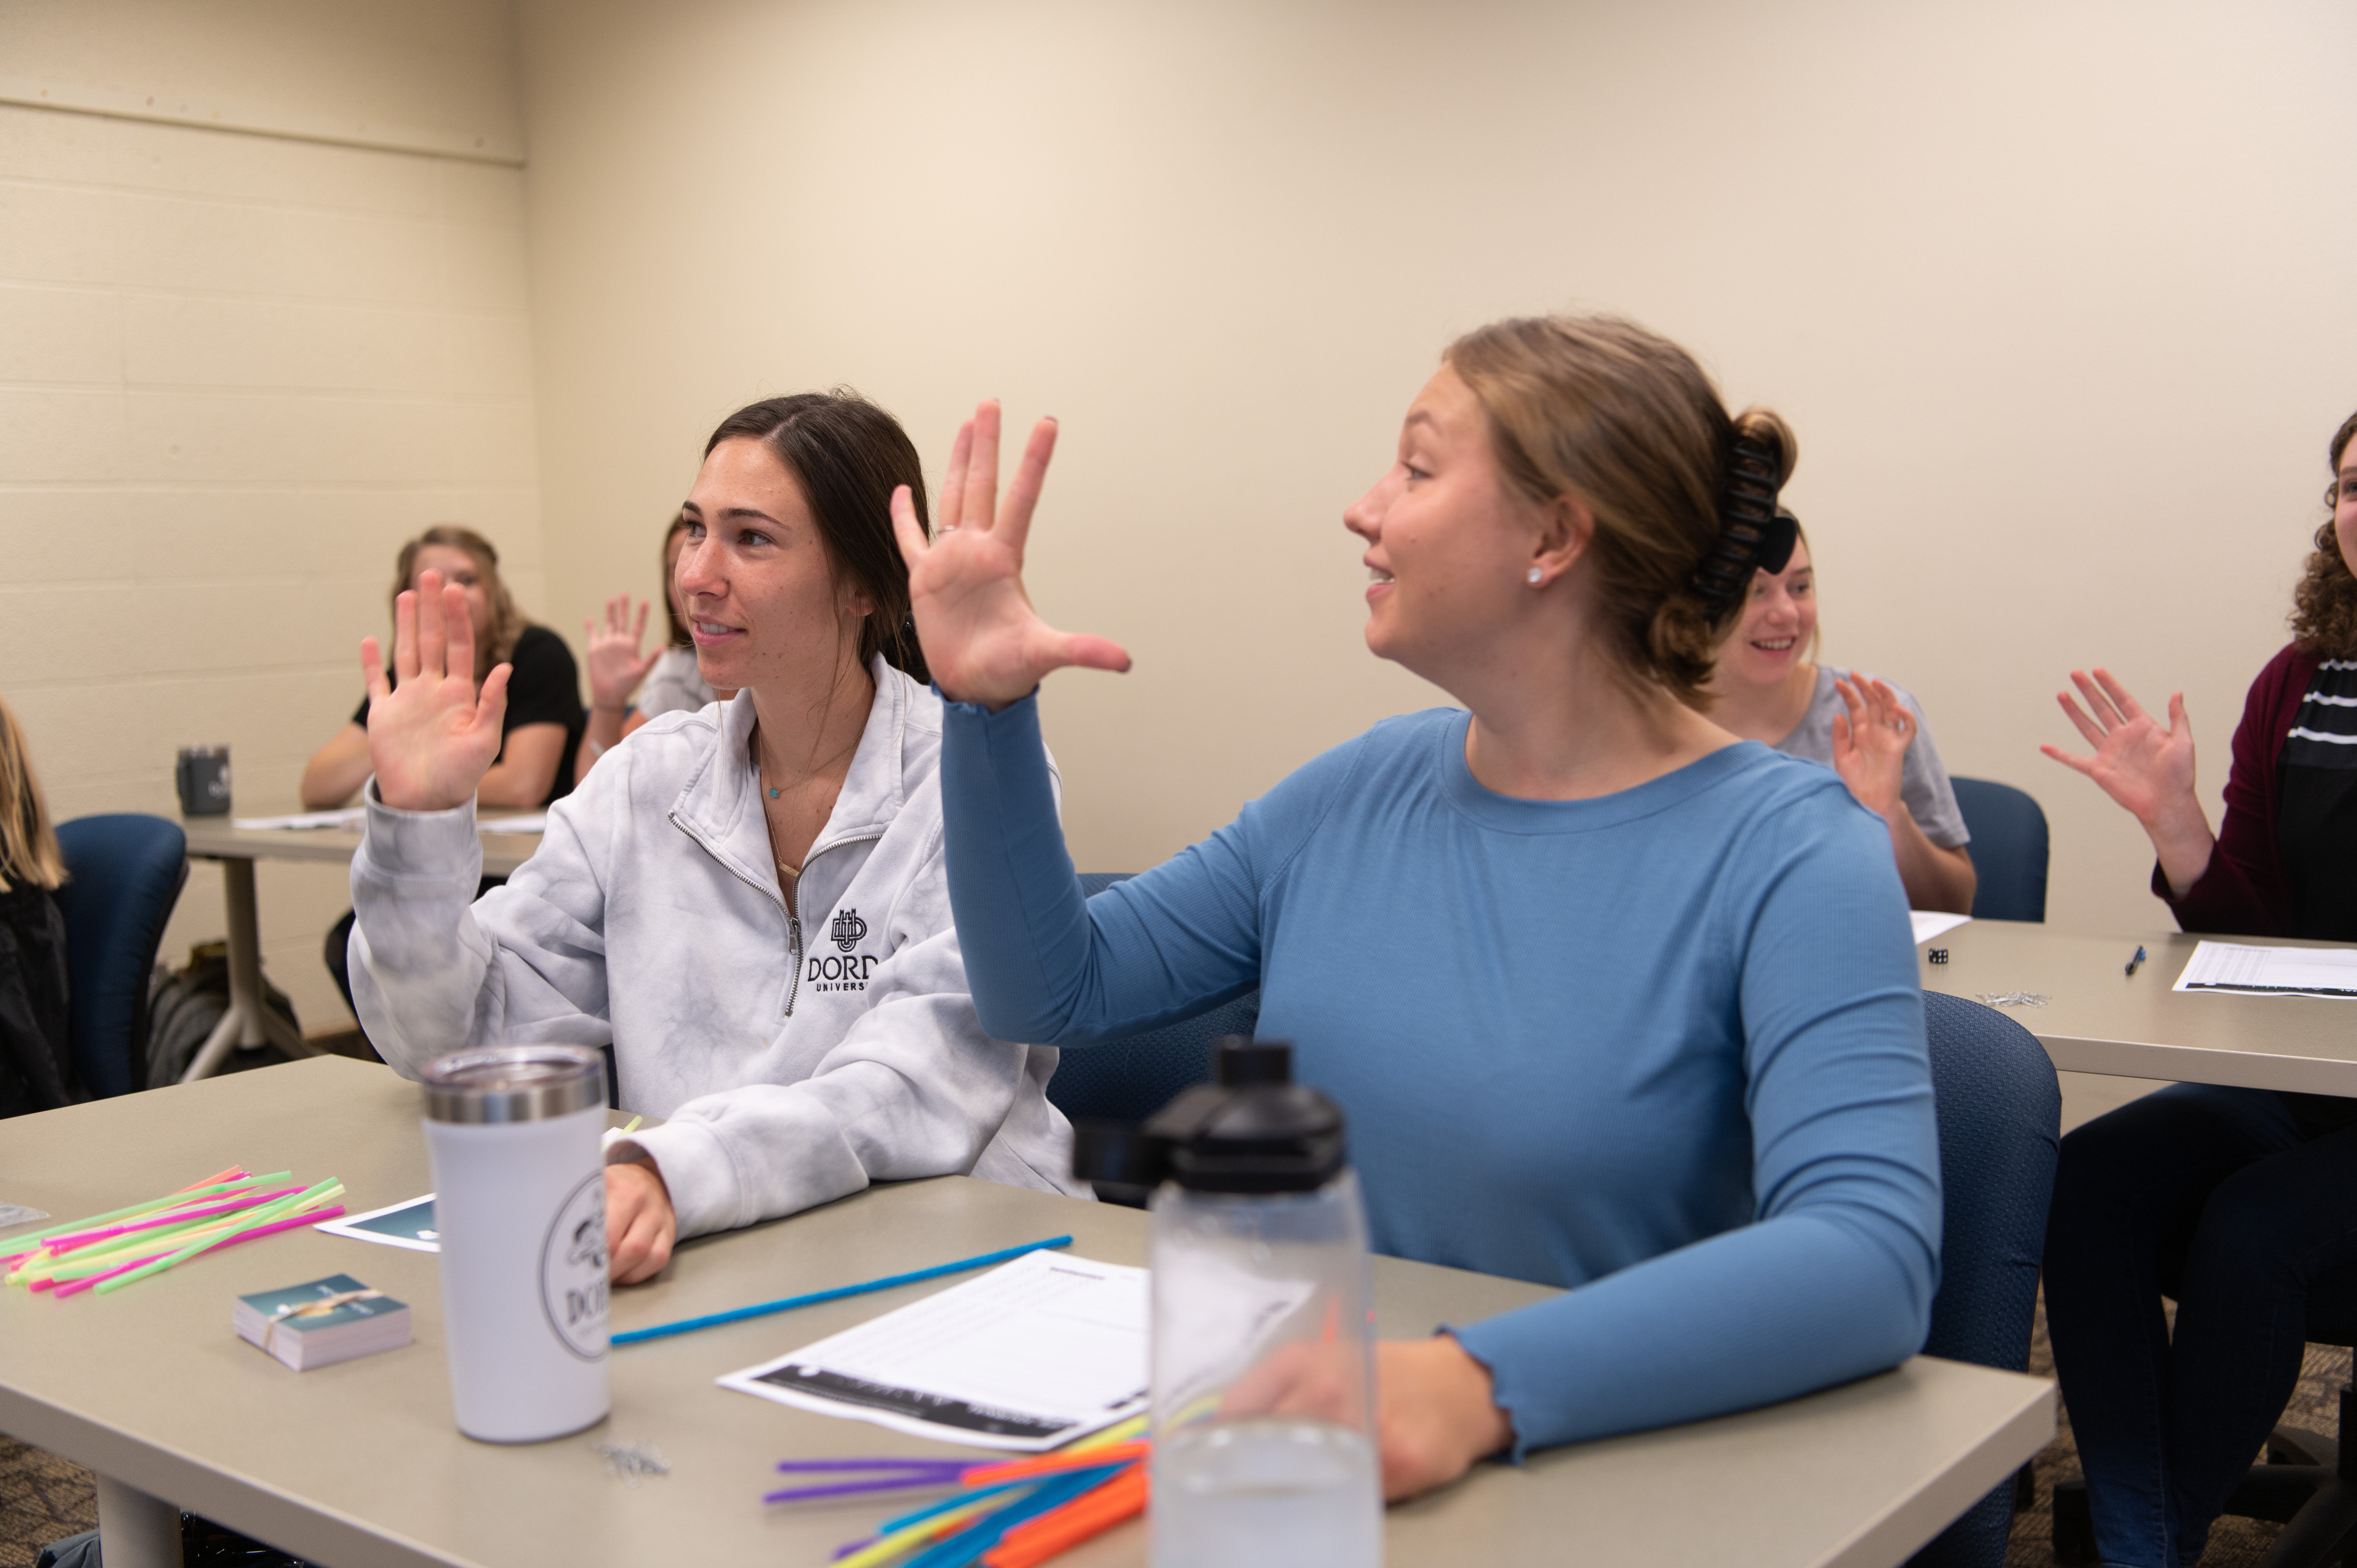 Students raise their hands to answer a question in class